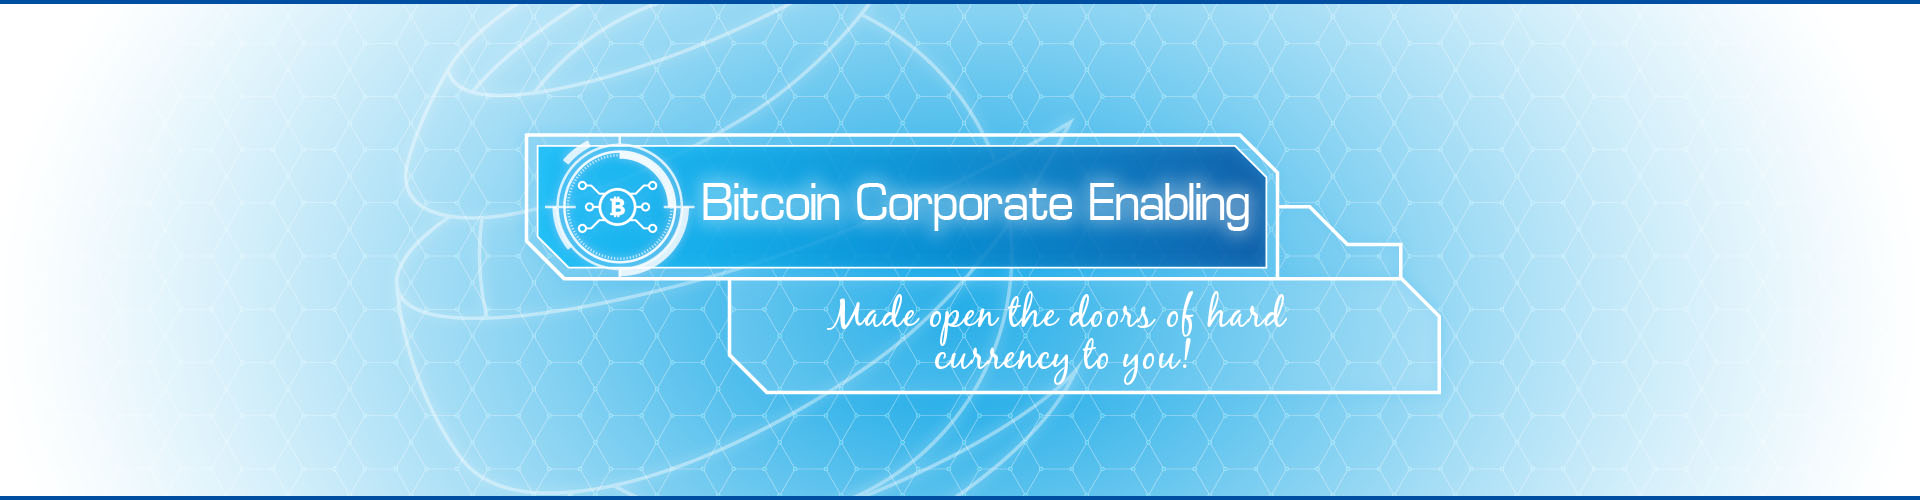 Bitcoin Corporate Enabling as Payment Method